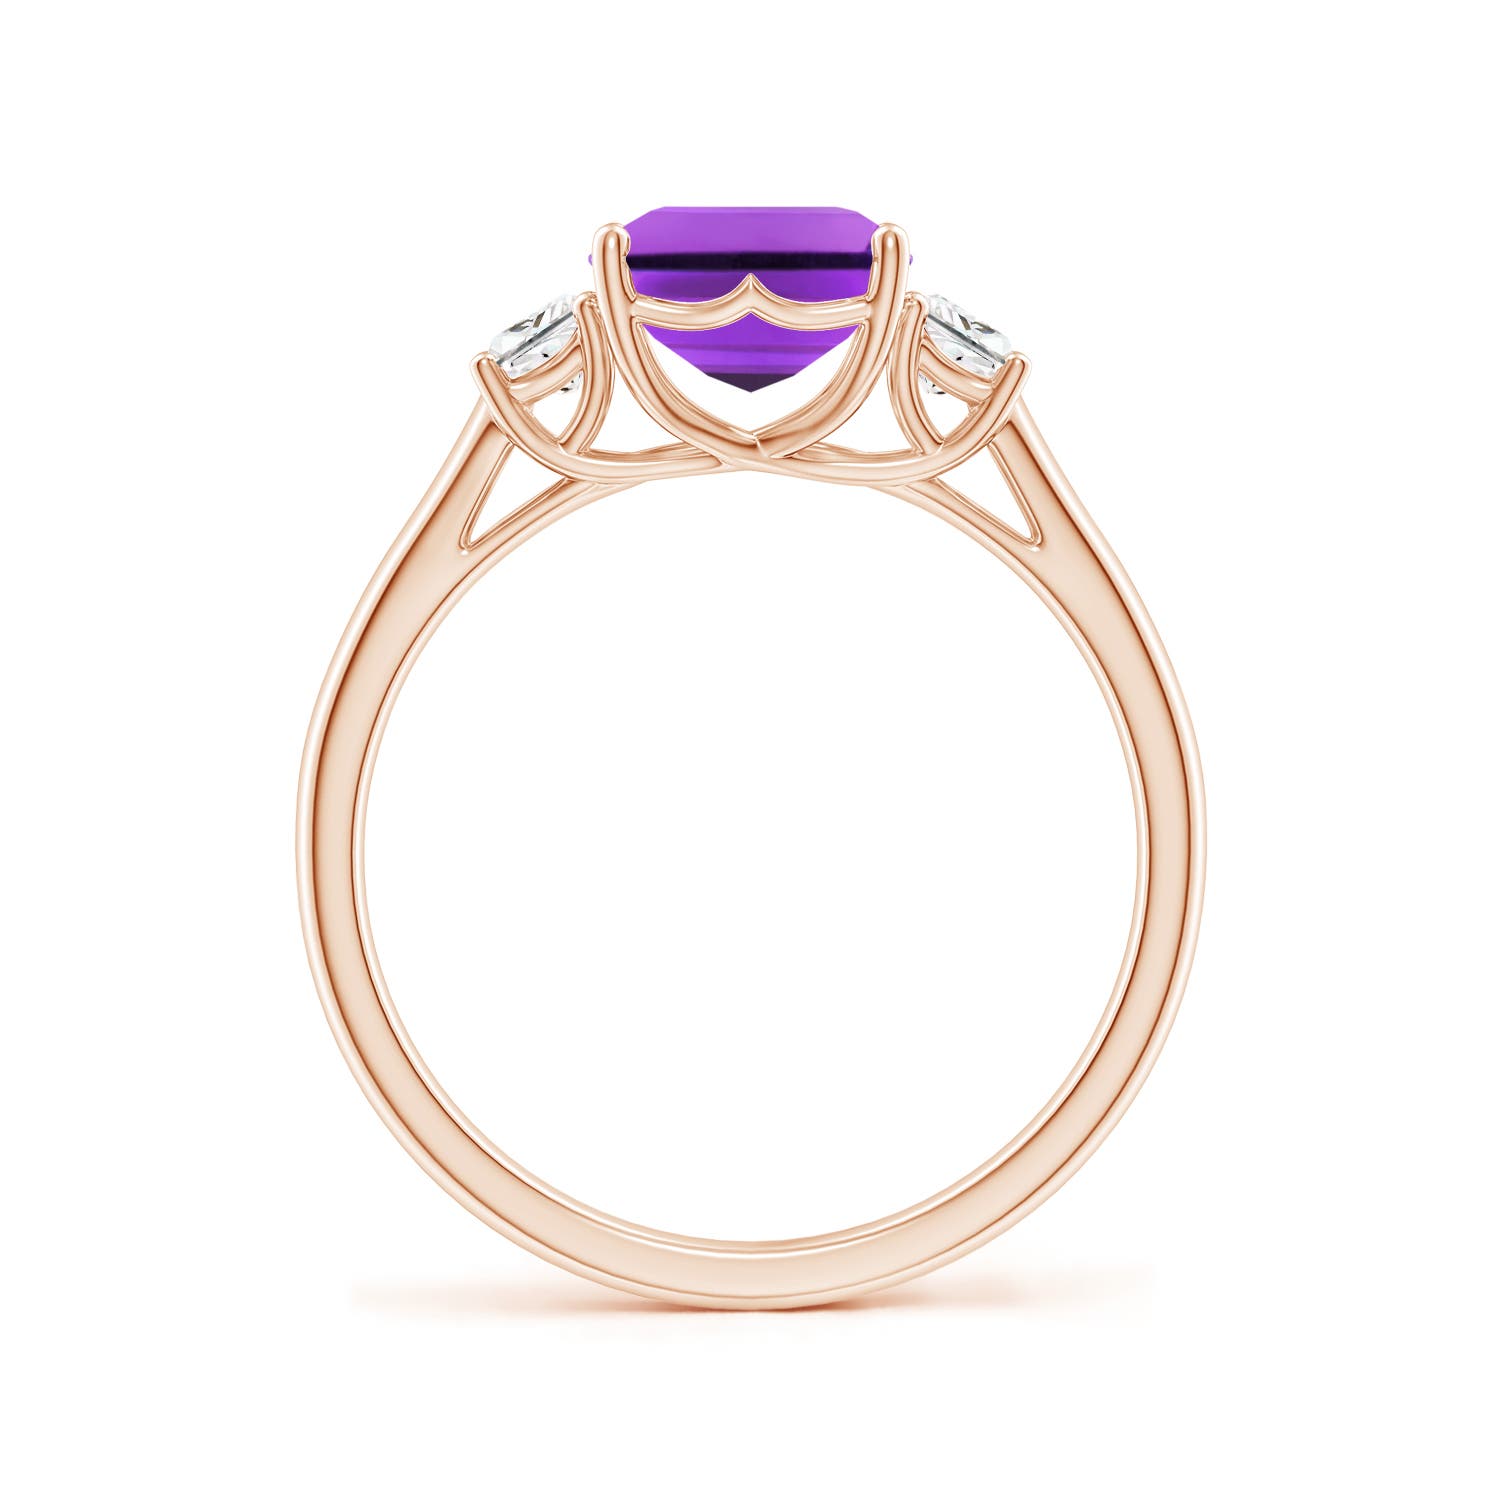 AAA- Amethyst / 2.52 CT / 14 KT Rose Gold